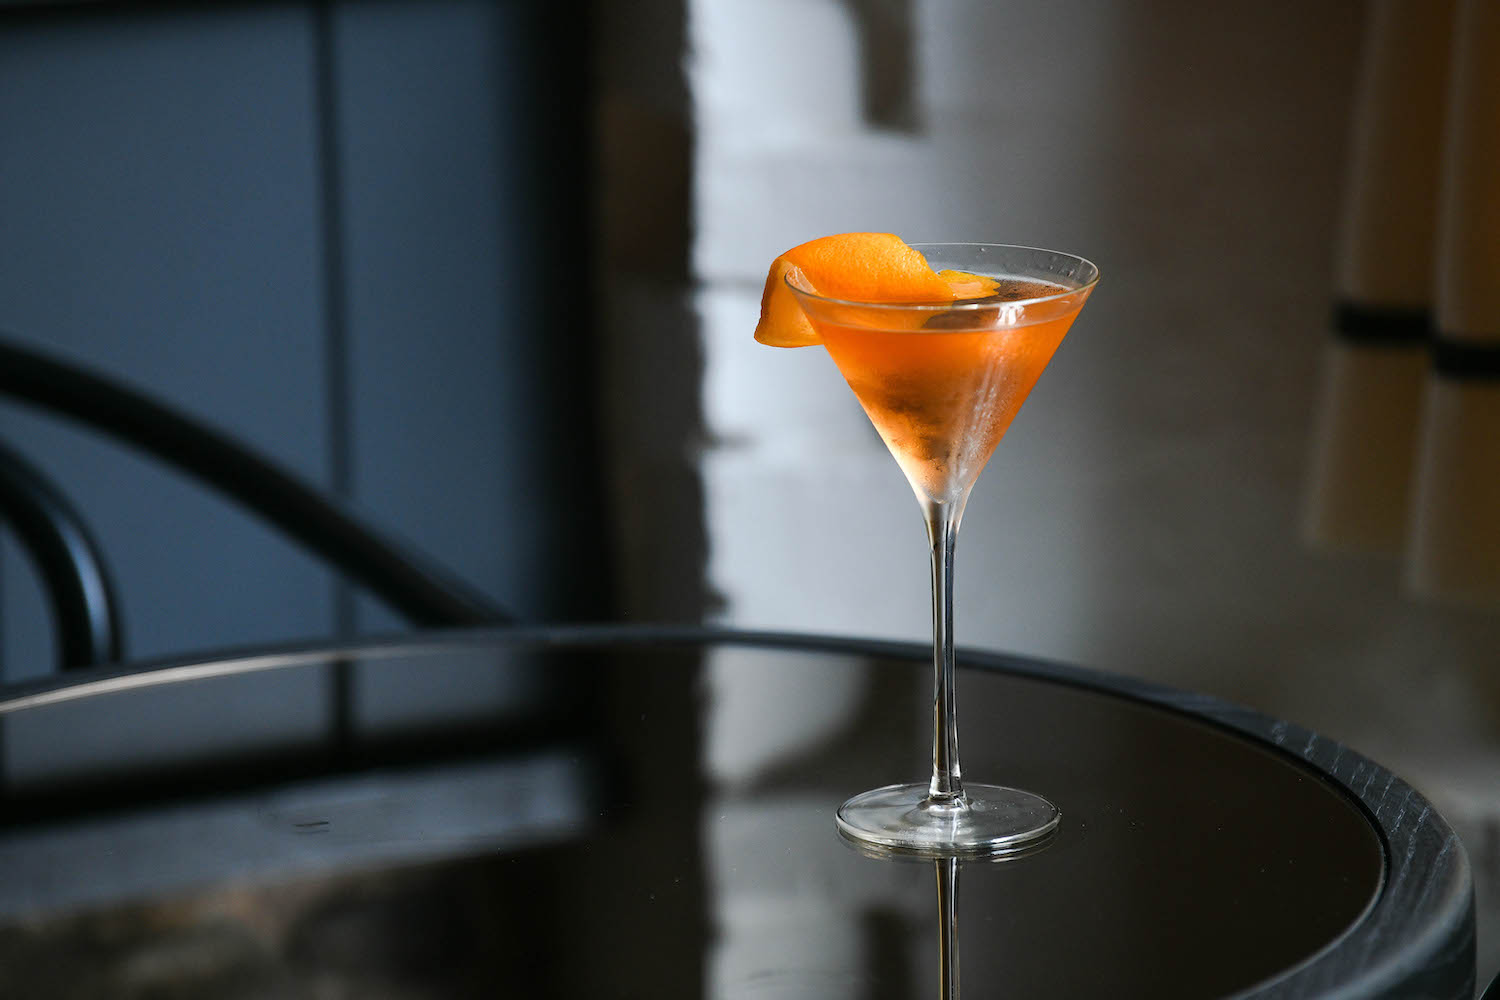 tequila cocktail with an orange garnish served in a martini glass on a table